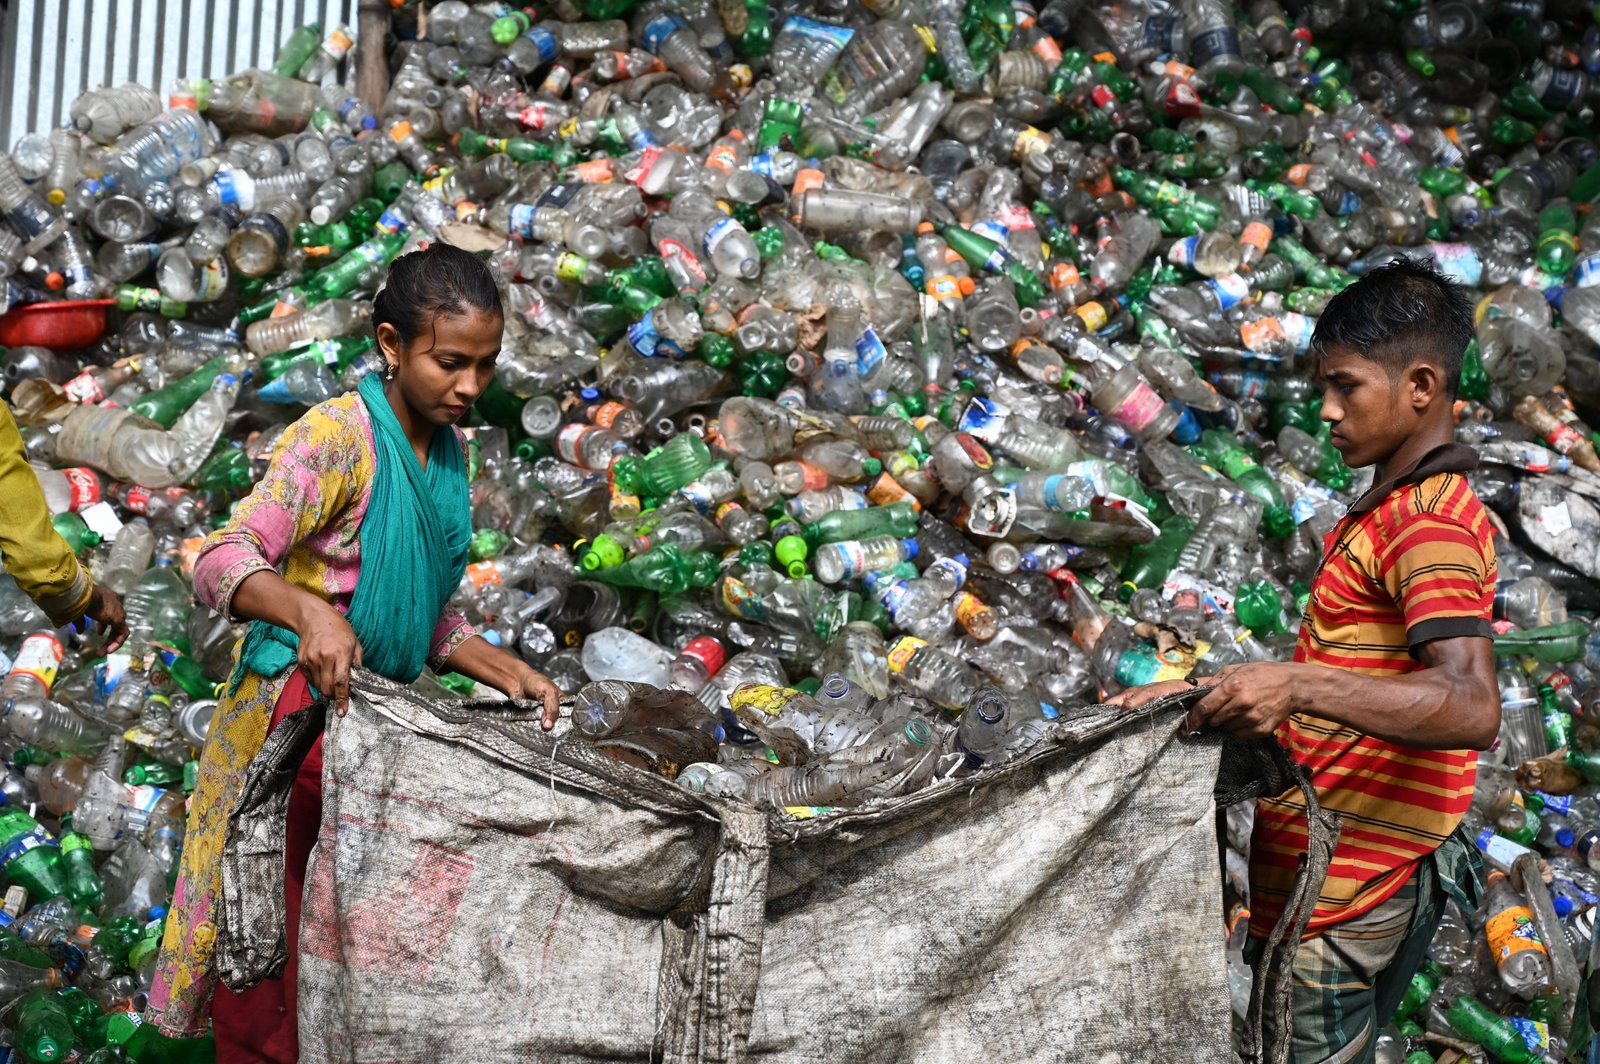 UN agencies at COP27 urge action to tackle impact of plastic on climate